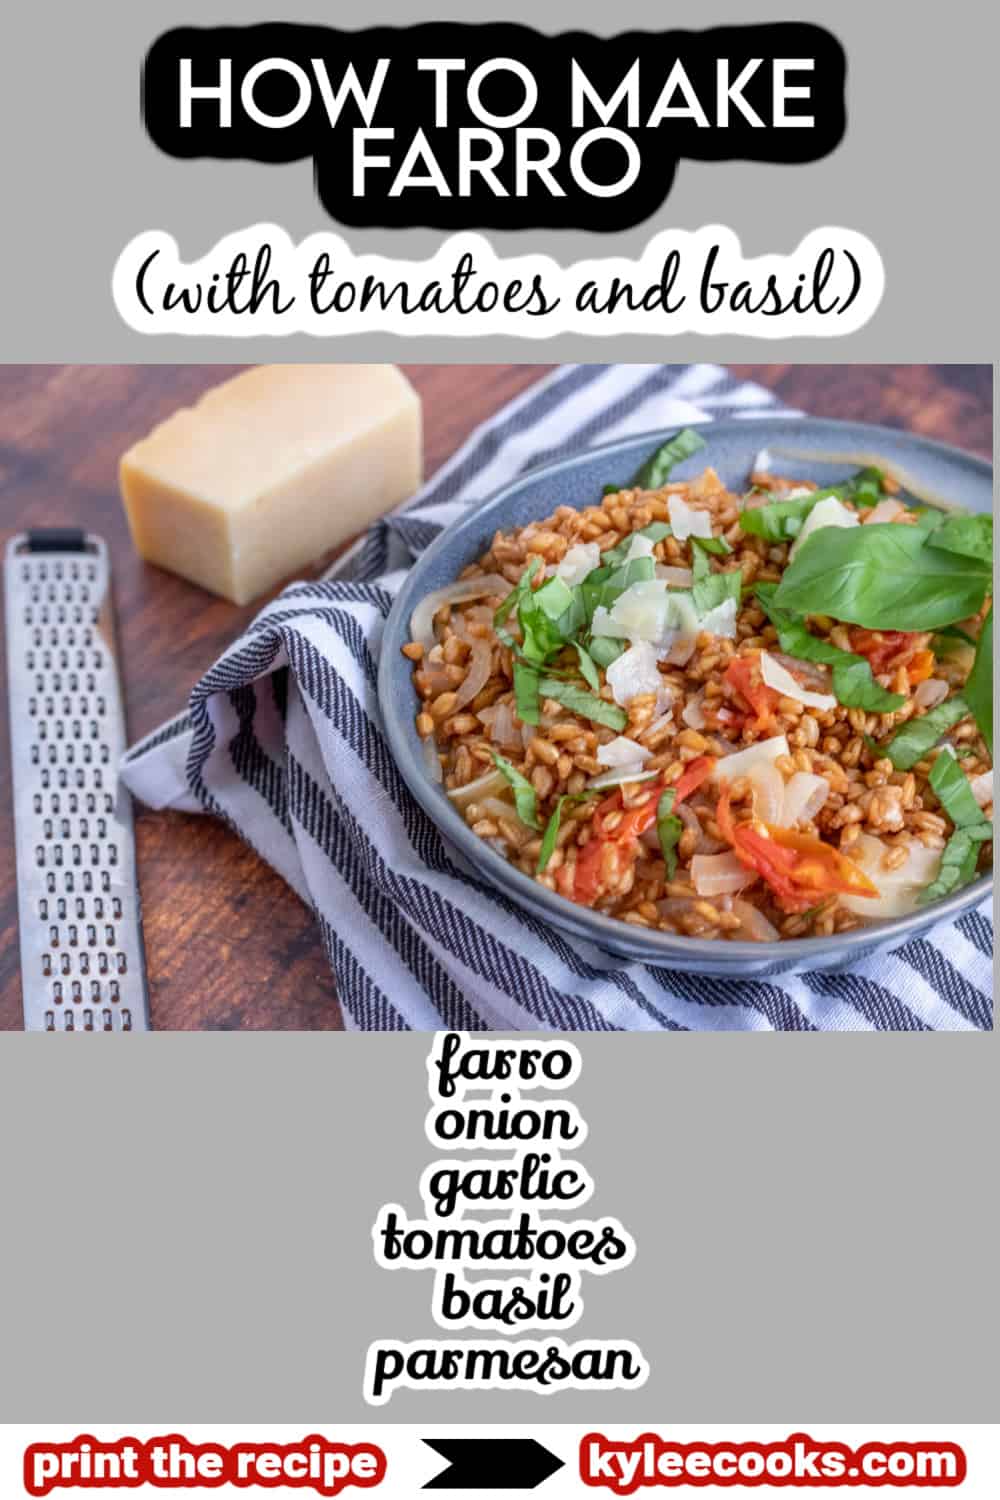 farro in a blue bowl with parmesan and basil